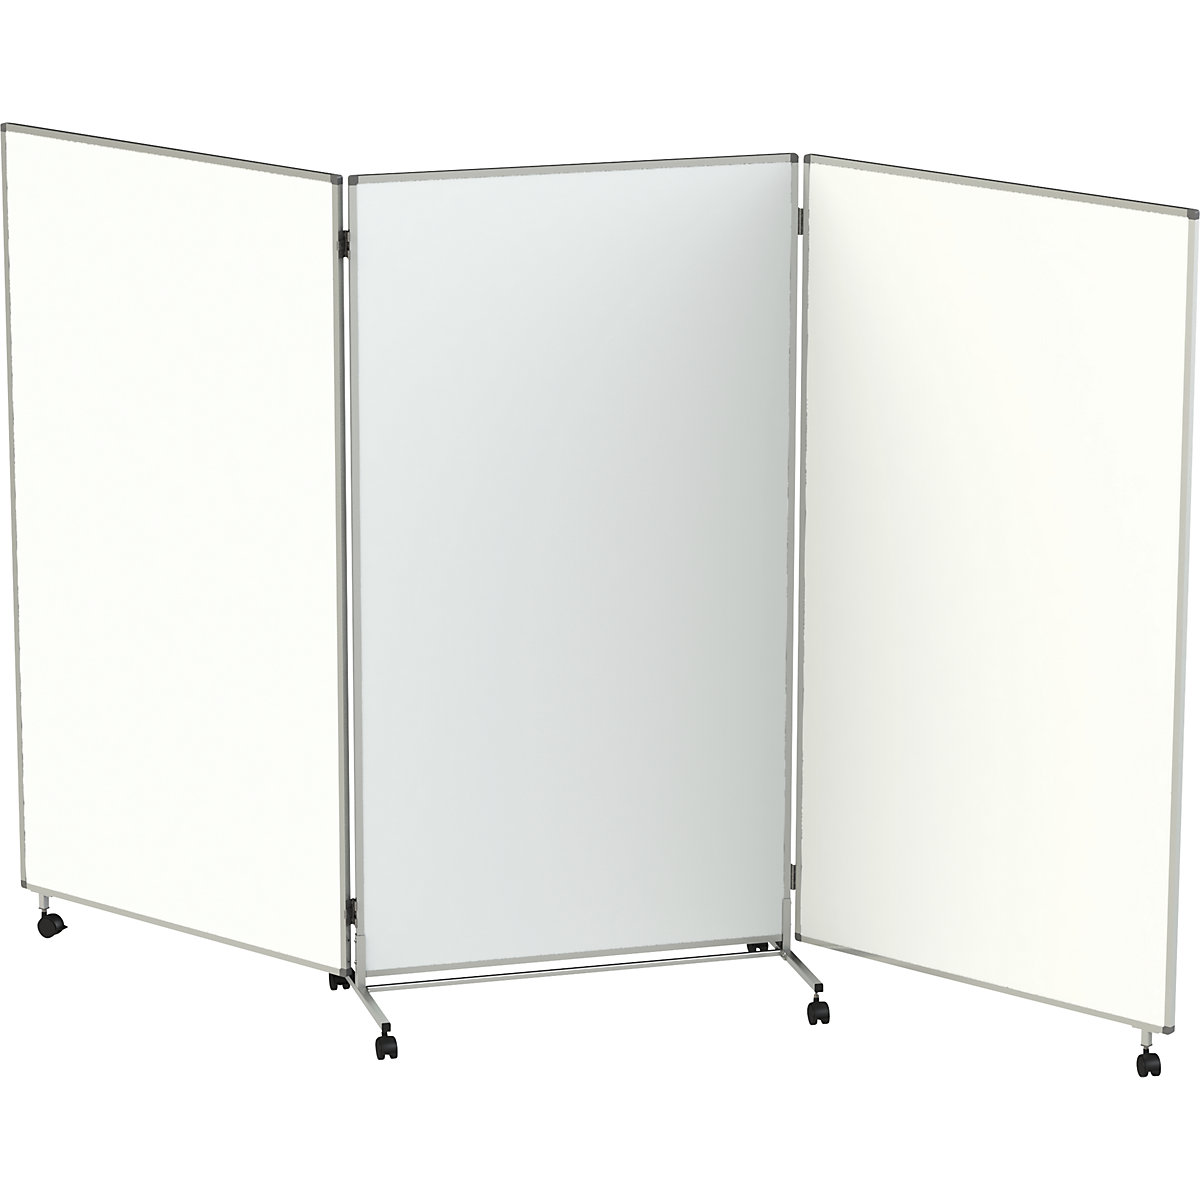 Presentation board/partition, mobile, folding, for writing on – eurokraft pro, magnetic, resistant to disinfectants, HxWxD 1905 x 1018/3074 x 500 mm-2